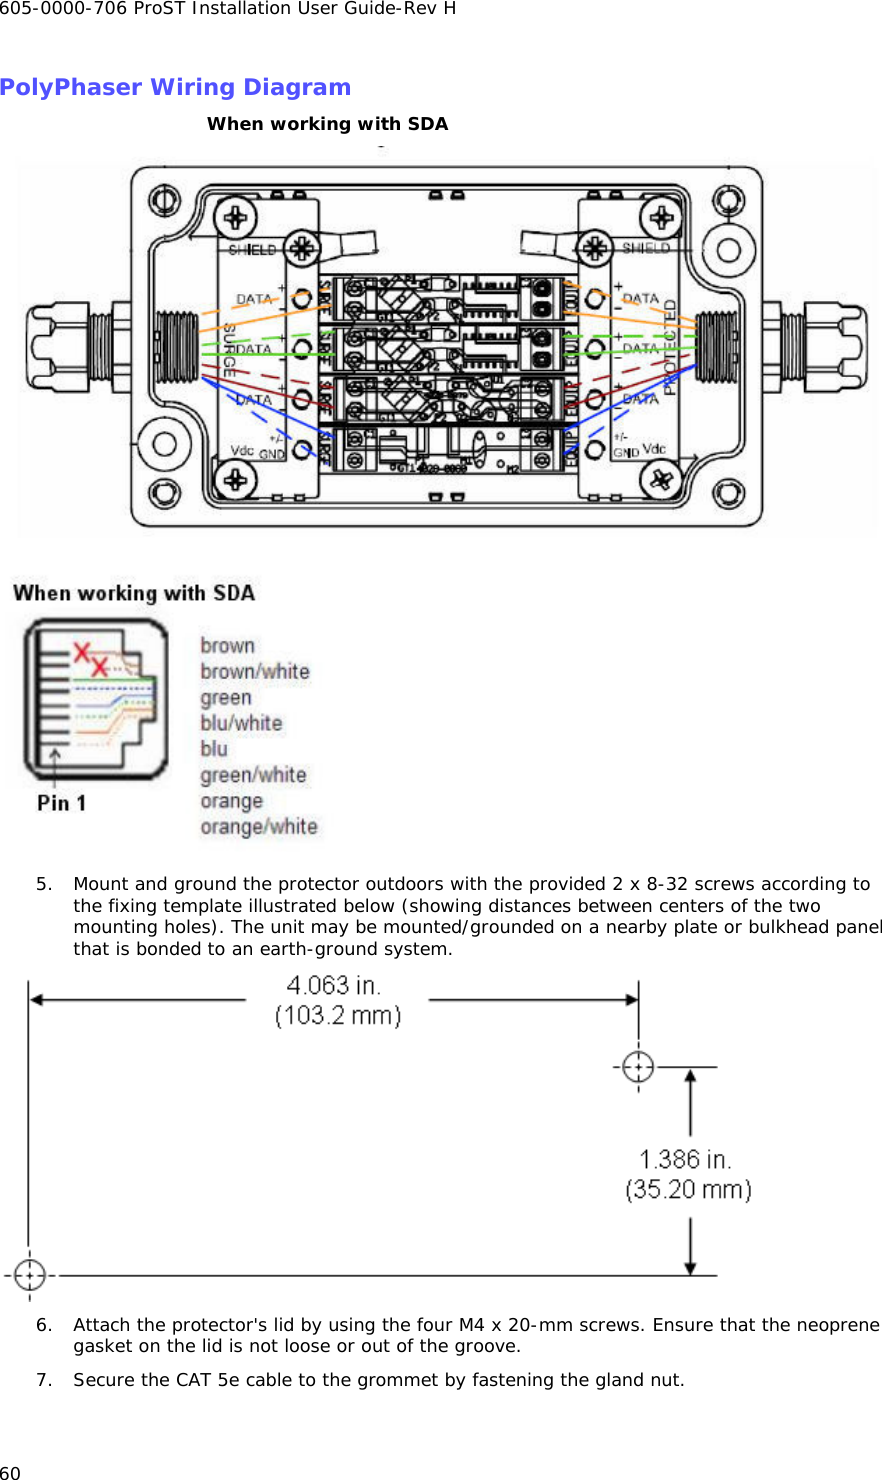 605-0000-706 ProST Installation User Guide-Rev H 60 PolyPhaser Wiring Diagram When working with SDA   5. Mount and ground the protector outdoors with the provided 2 x 8-32 screws according to the fixing template illustrated below (showing distances between centers of the two mounting holes). The unit may be mounted/grounded on a nearby plate or bulkhead panel that is bonded to an earth-ground system.  6. Attach the protector&apos;s lid by using the four M4 x 20-mm screws. Ensure that the neoprene gasket on the lid is not loose or out of the groove. 7. Secure the CAT 5e cable to the grommet by fastening the gland nut. 